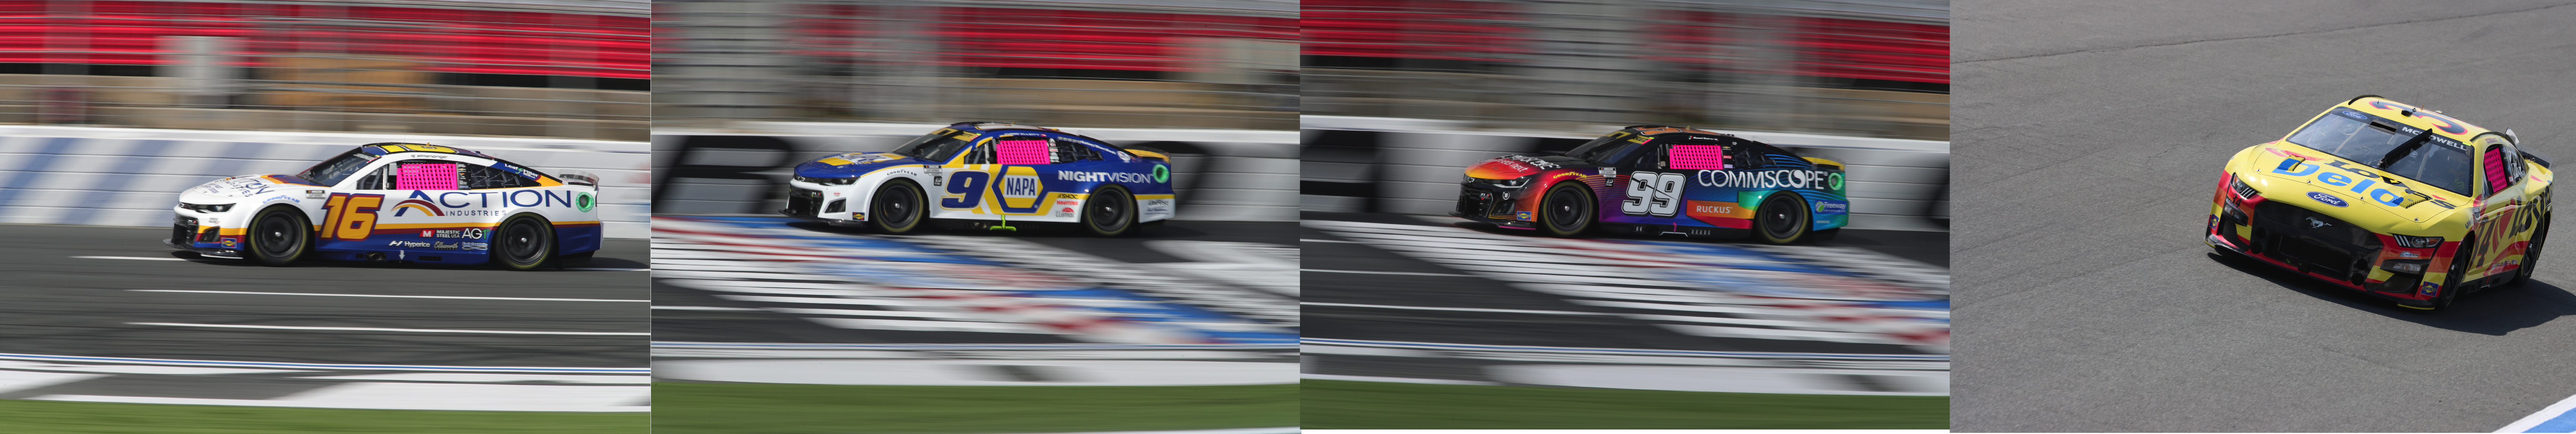 It's a quartet of quality Charlotte ROVAL race picks. (Photo: Stephen Conley and Molly Gastineau | The Podium Finish)